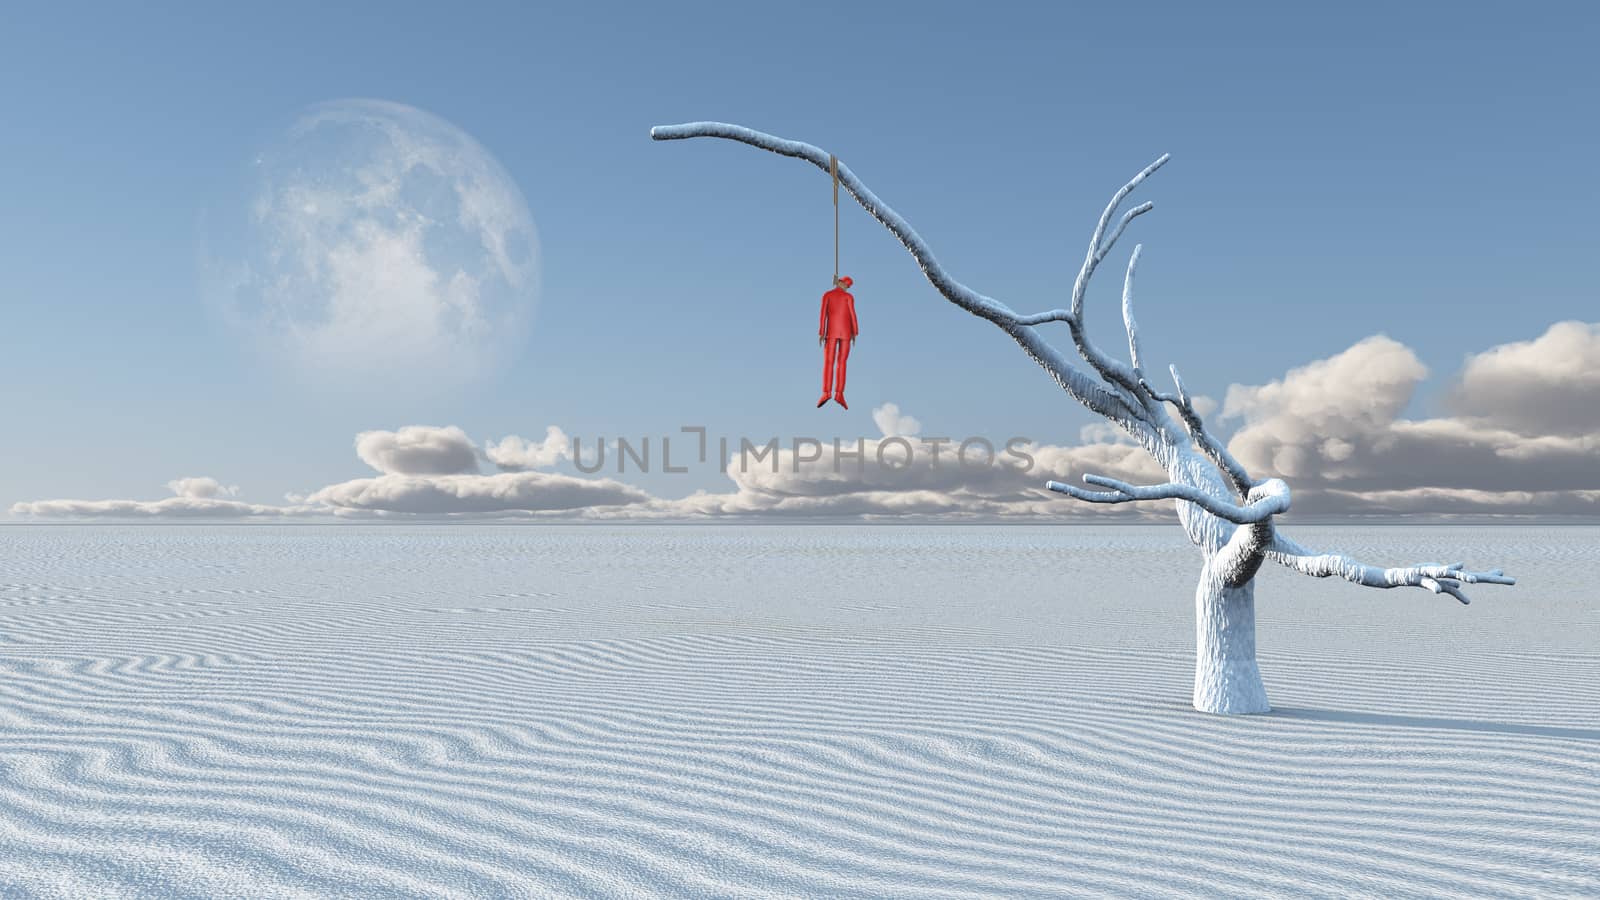 Surreal white desert. Man in red suit hanged on a dry tree.
